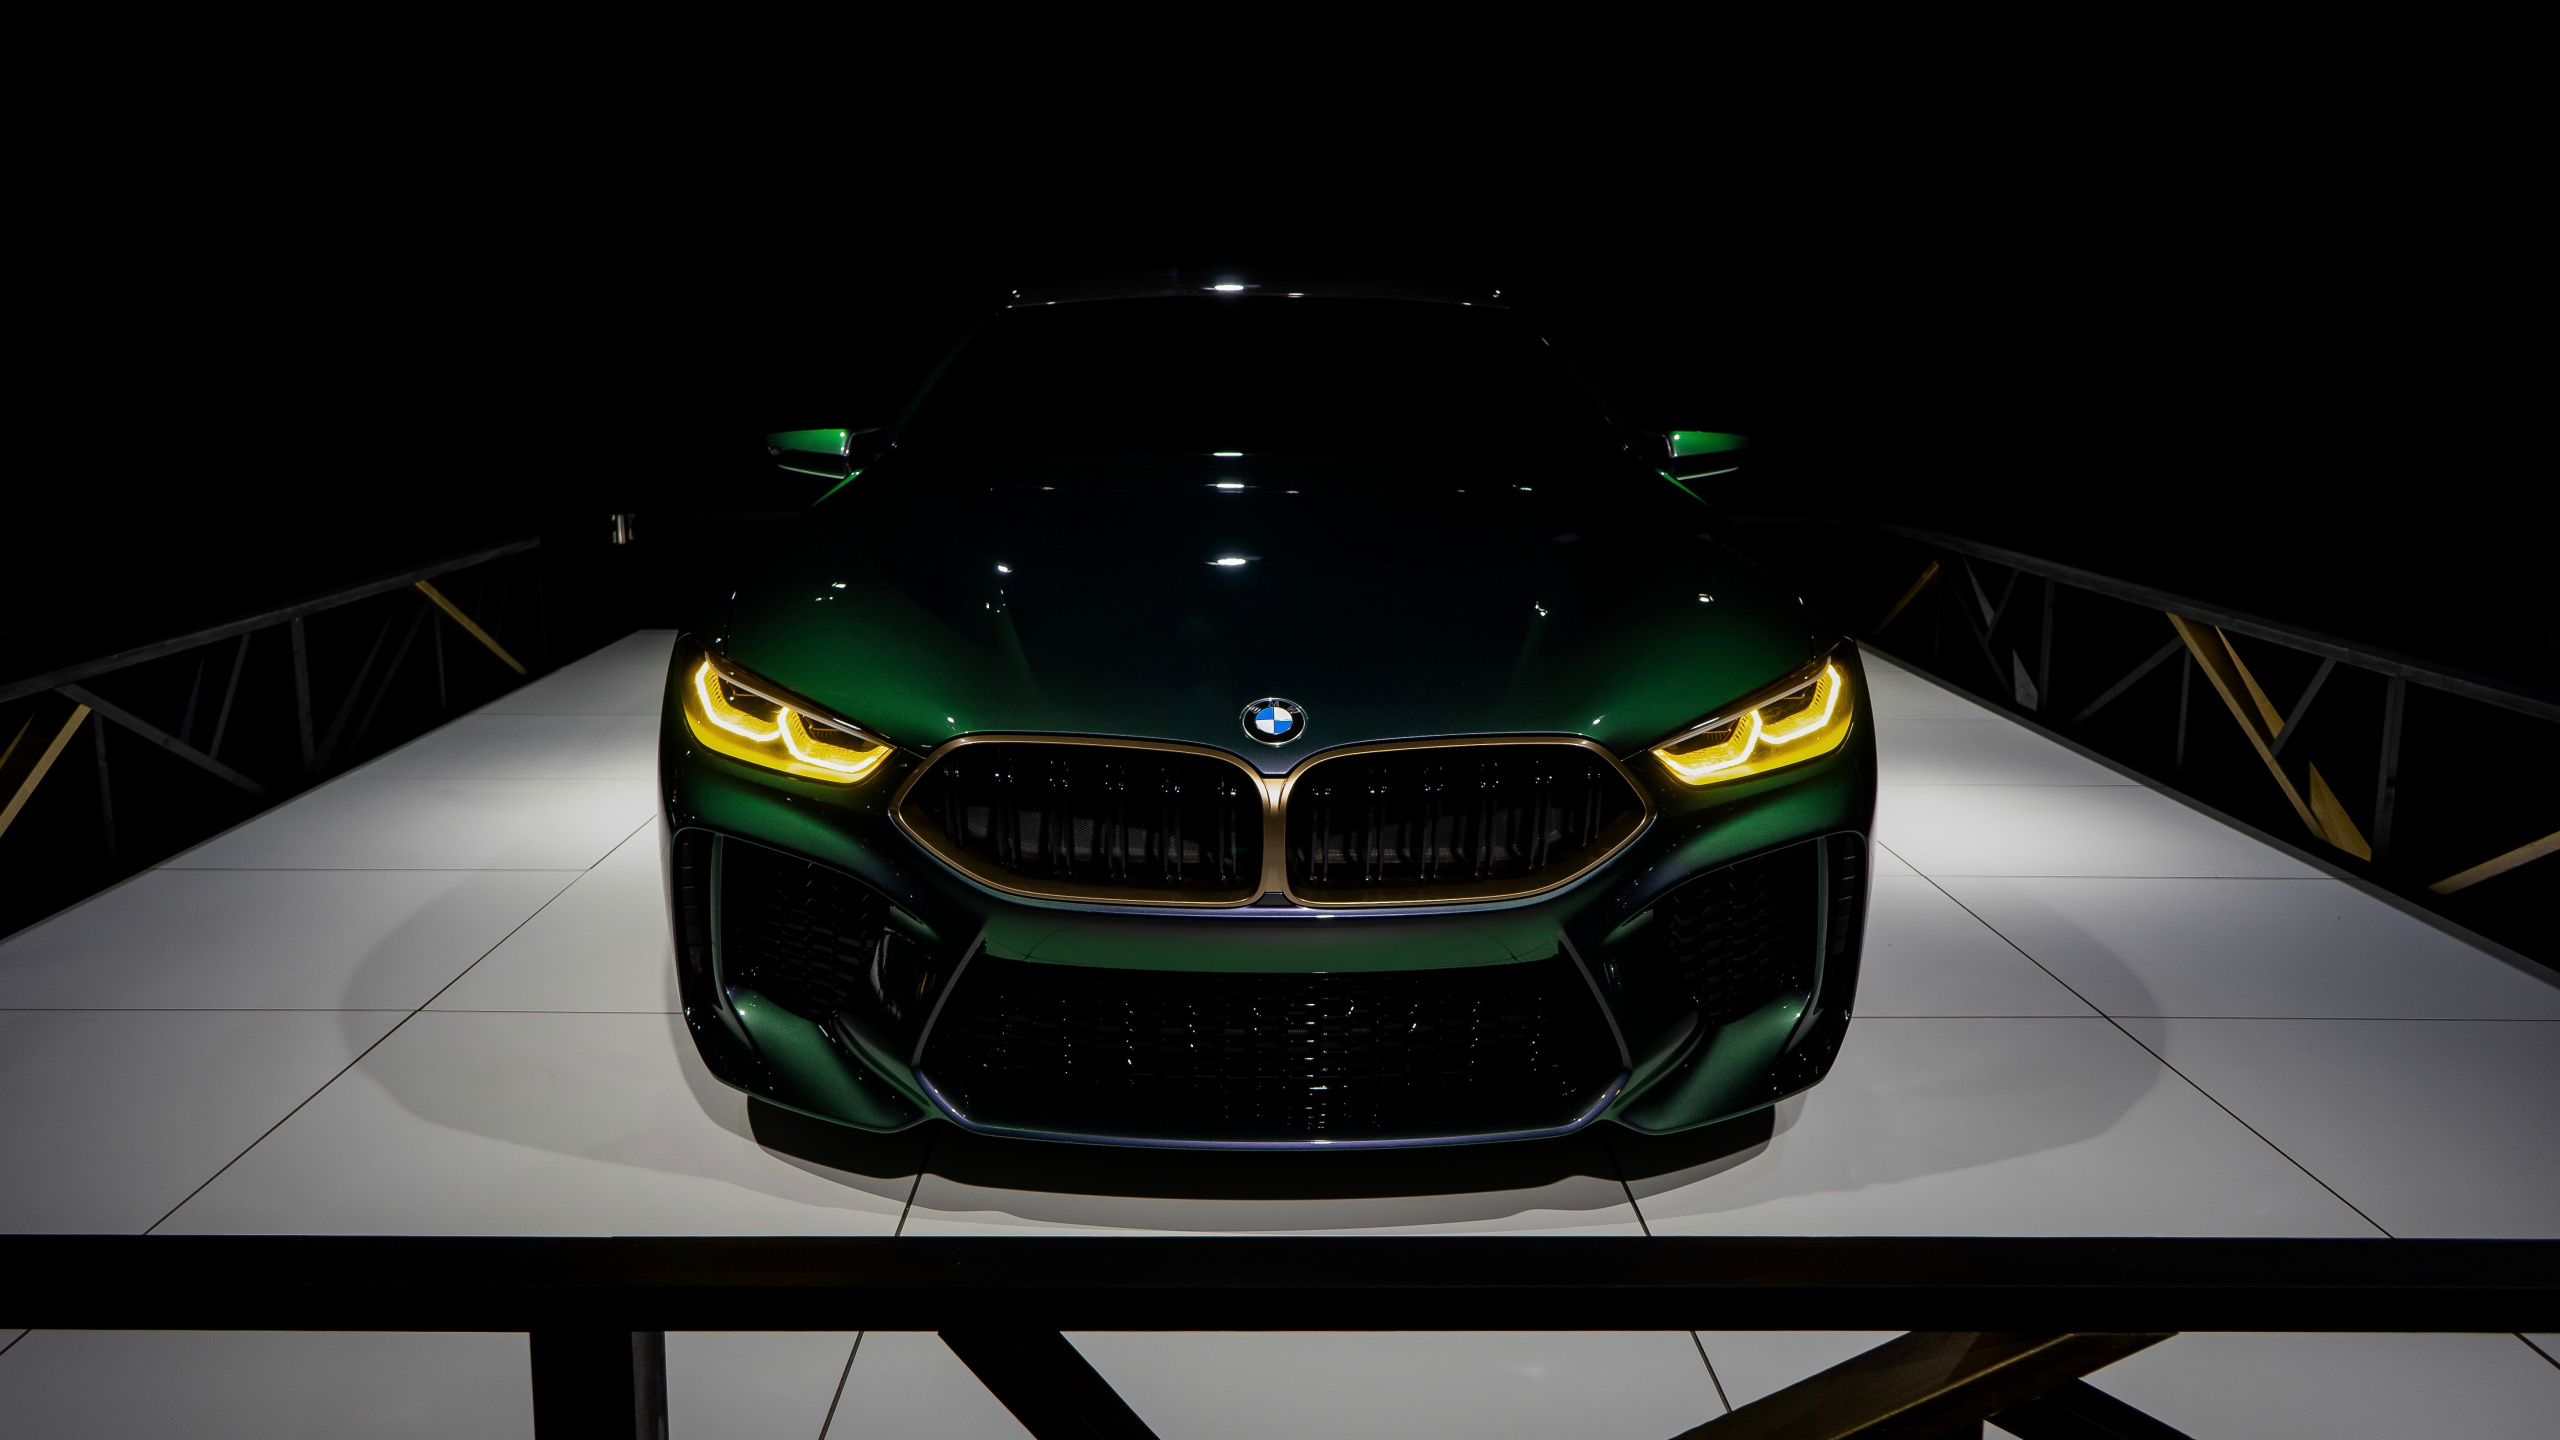 Green Bmw m 3 Coupe. Wallpaper in 2560x1440 Resolution